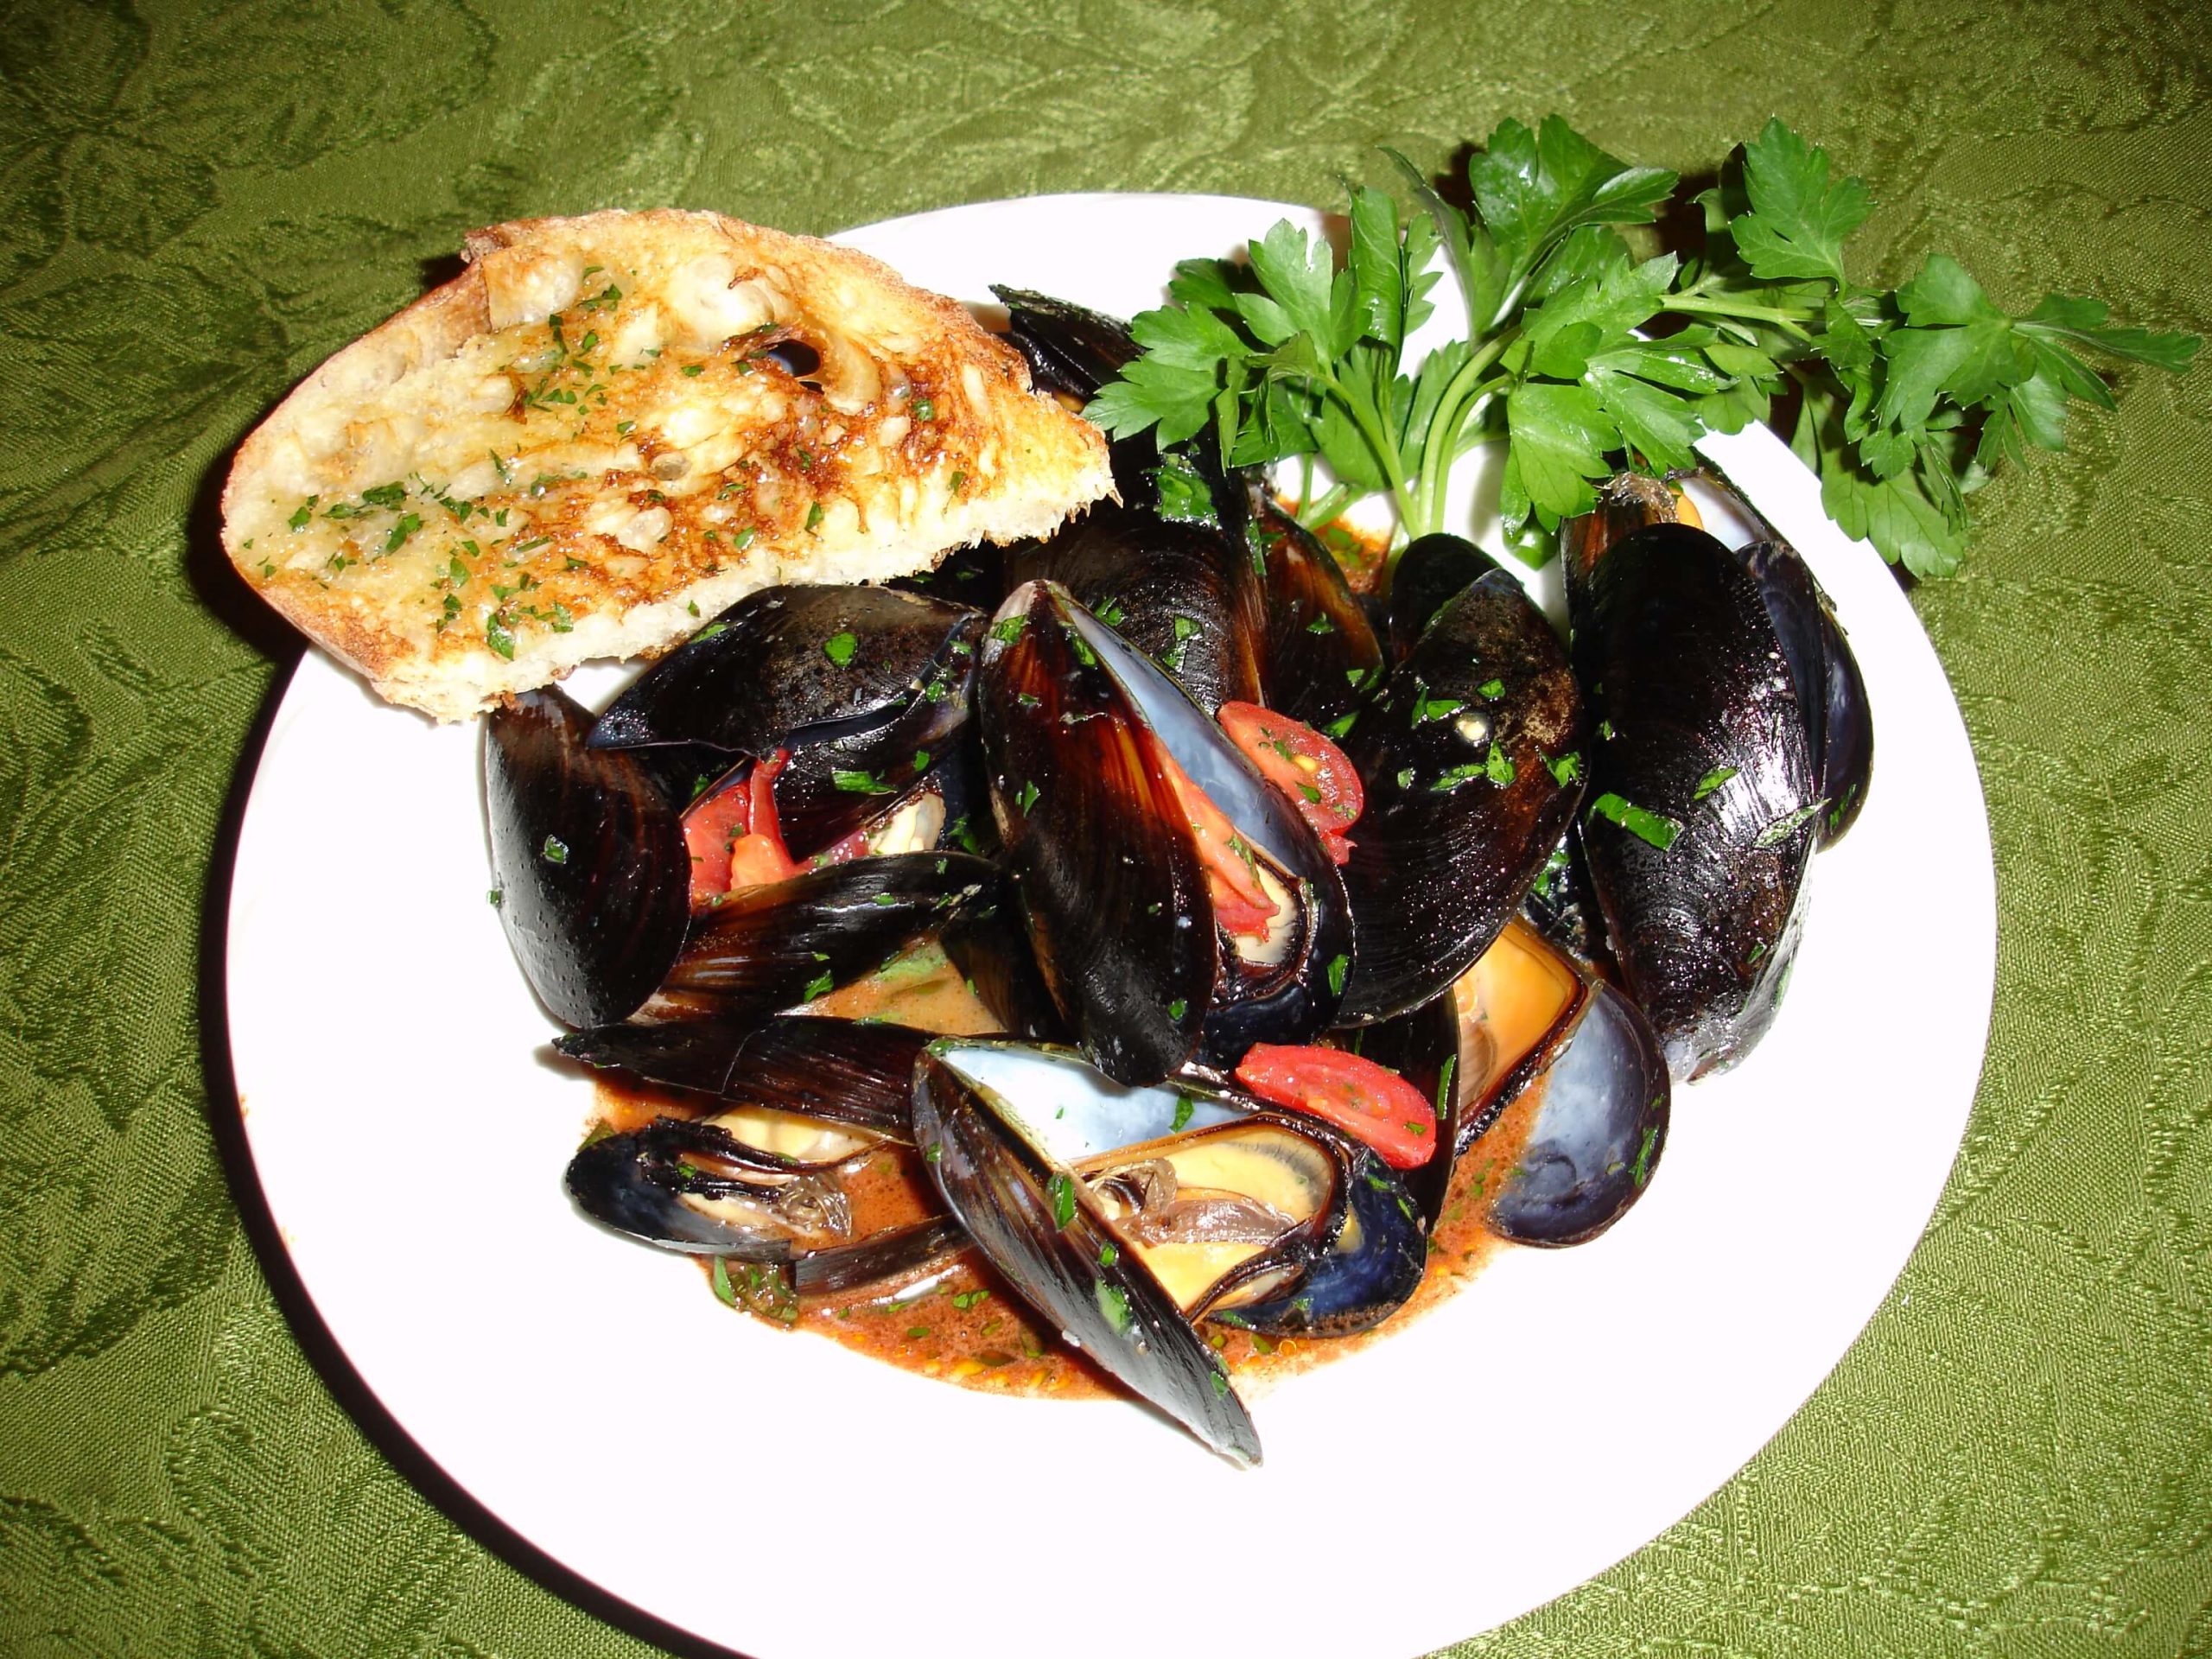 Roasted Mussels with a Smoked Paprika Broth